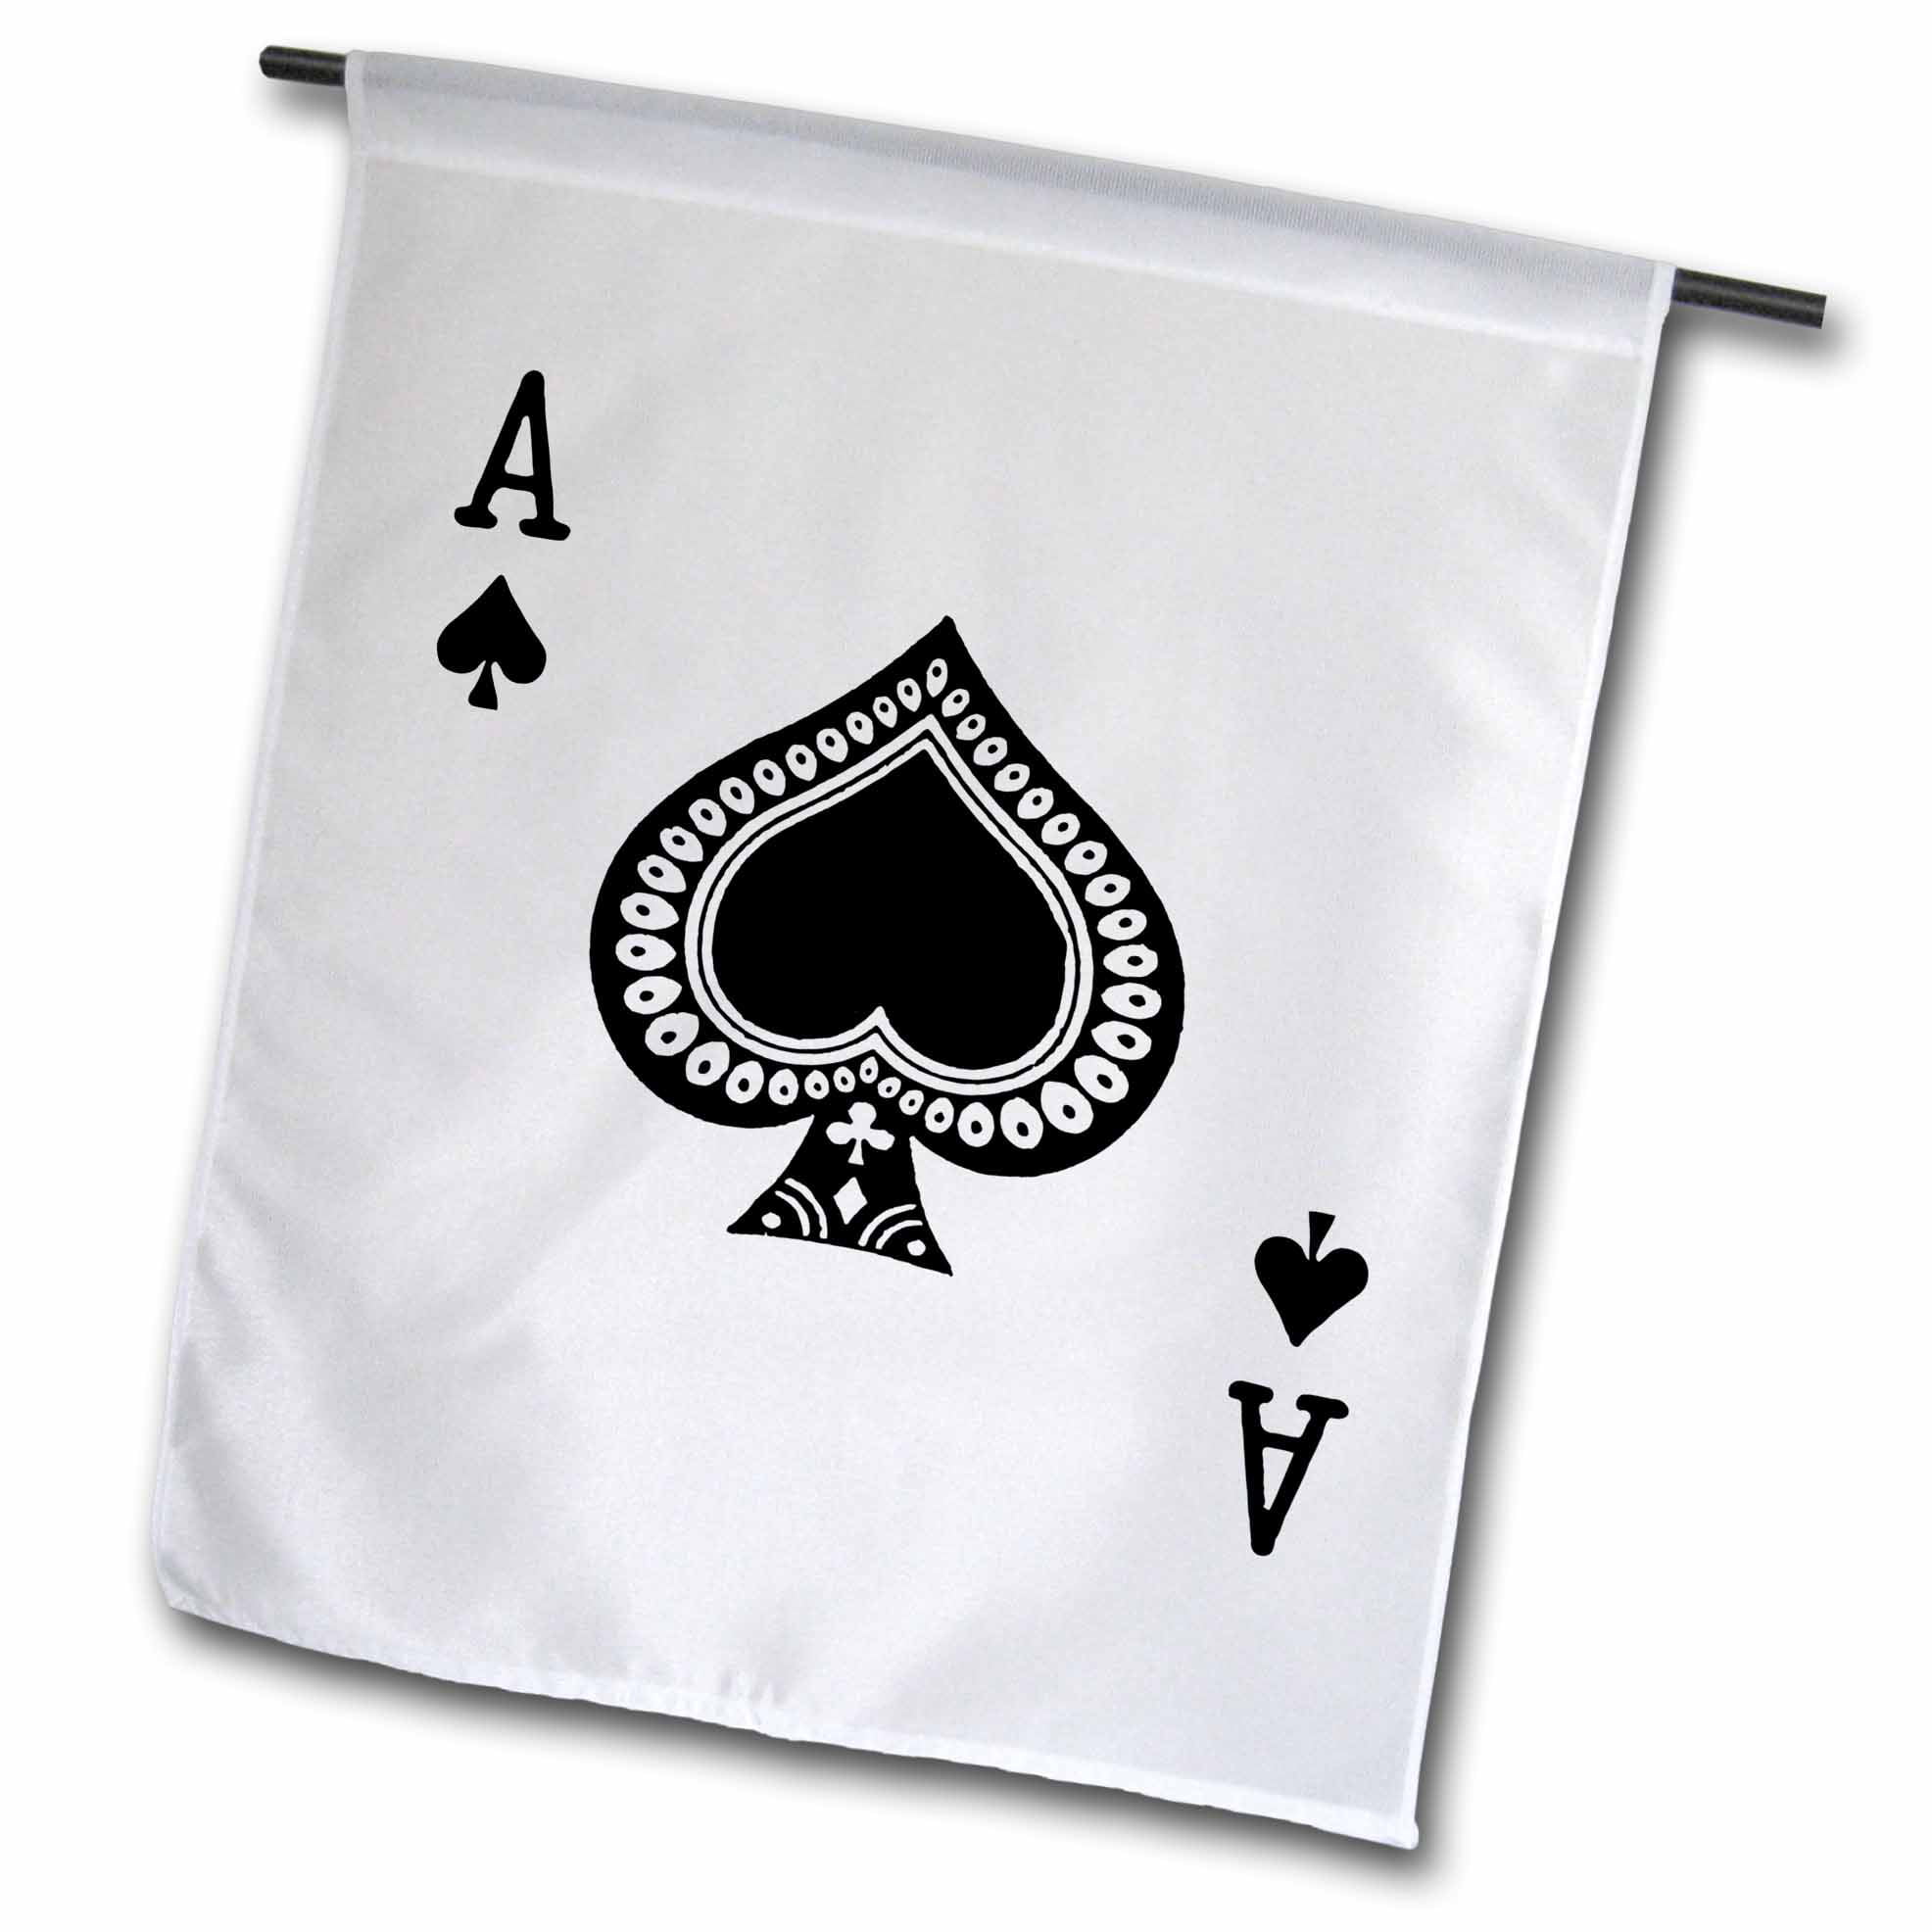 3dRose Ace of Spades playing card - Black spade suit - Gifts for cards game  players of poker bridge games - Garden Flag, 18 by 27-inch